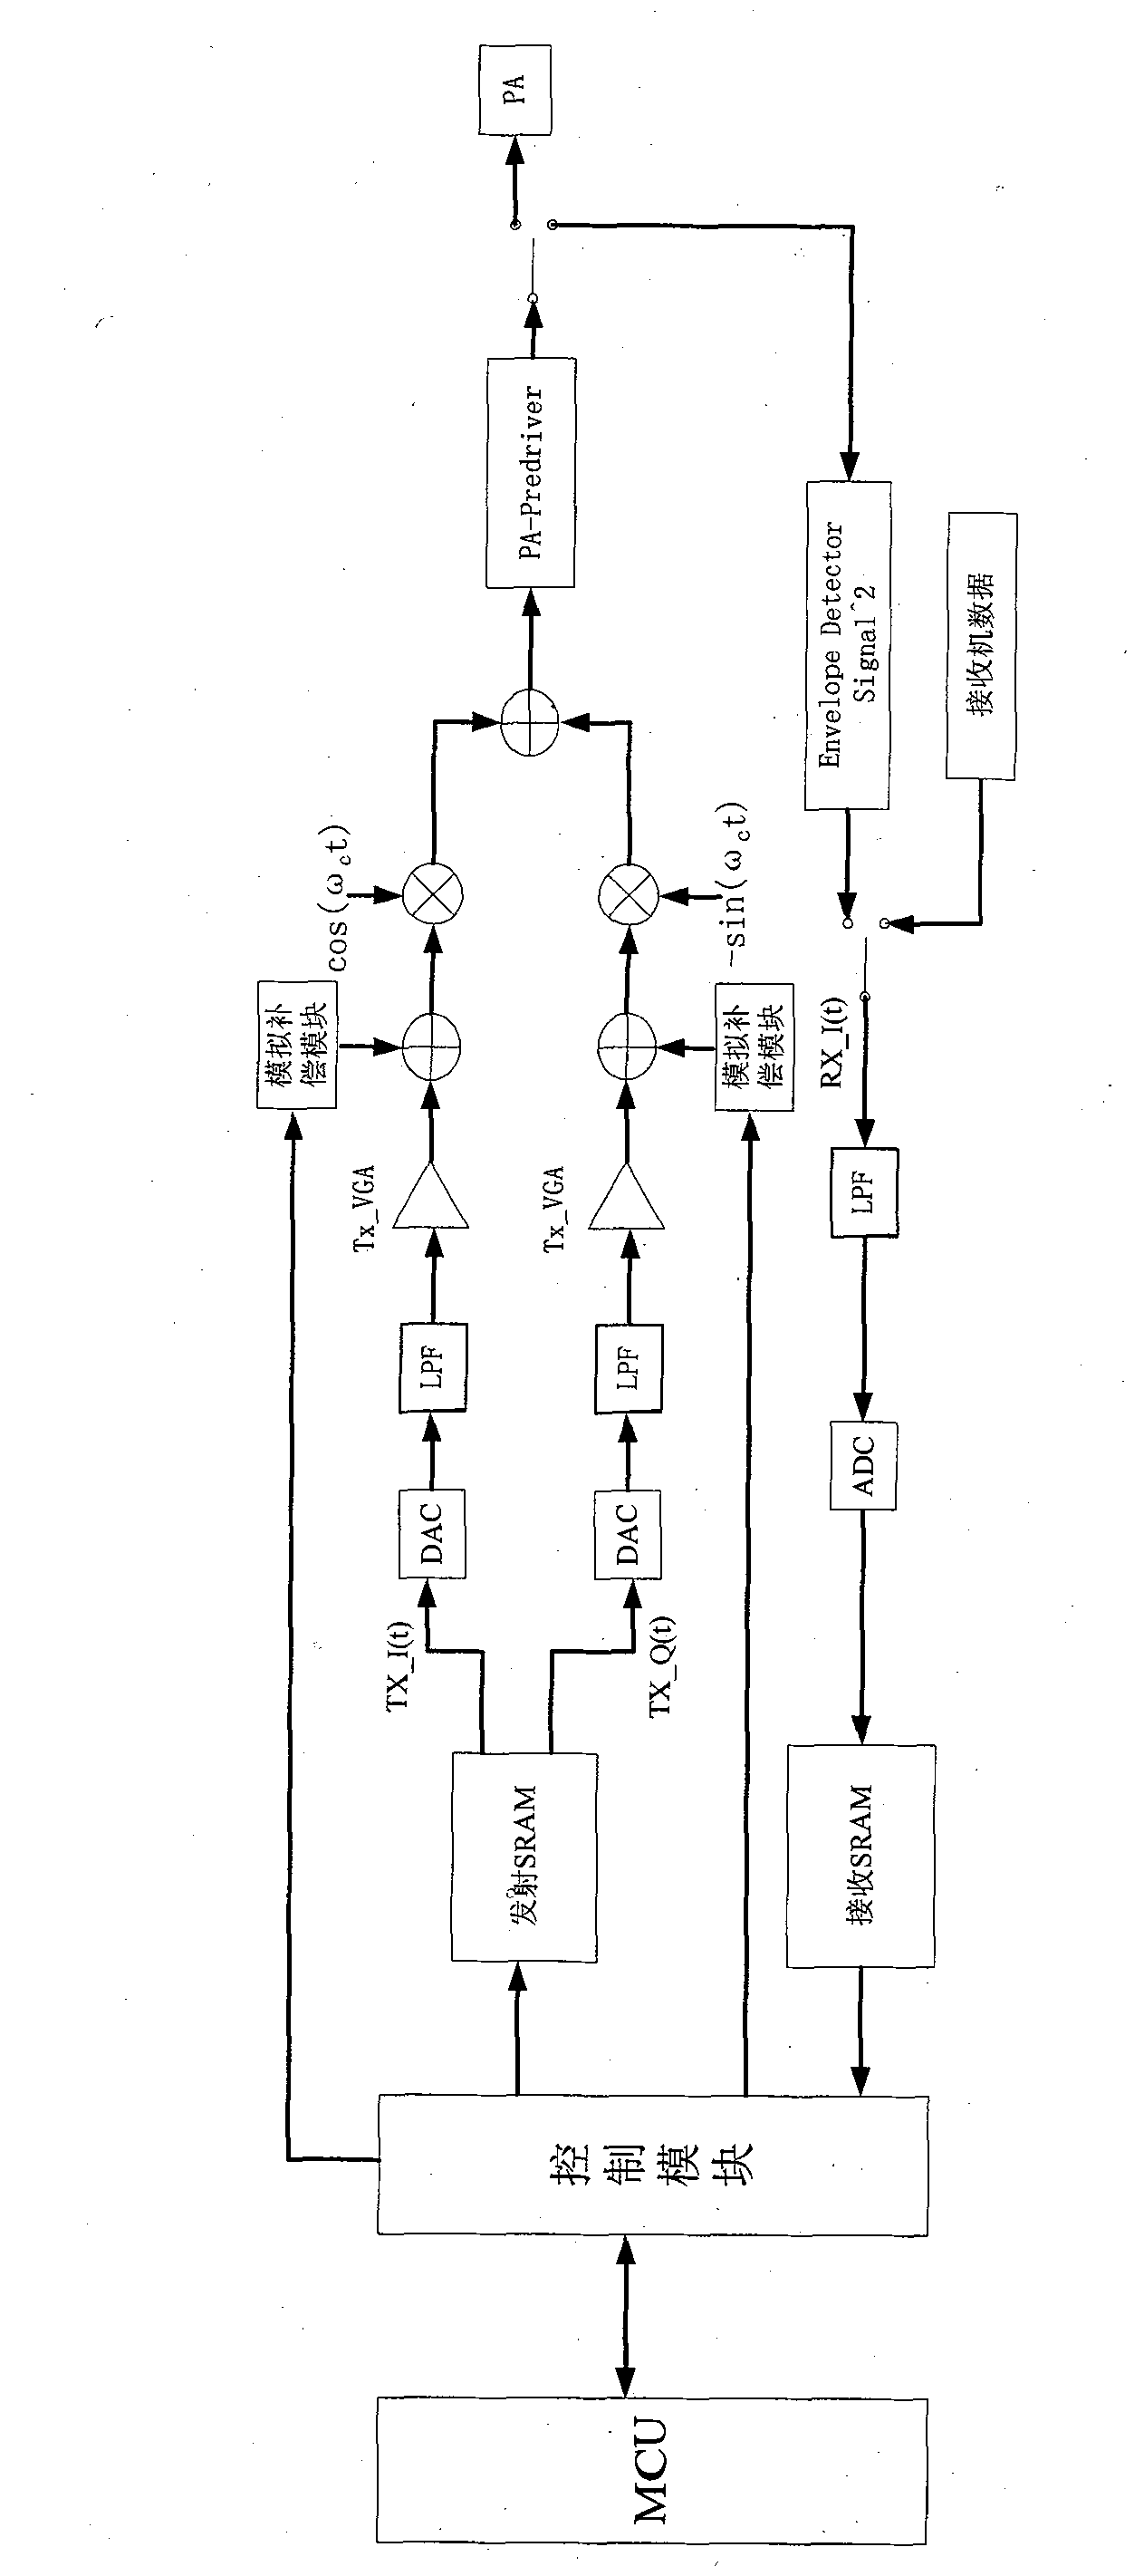 Method and device for correcting wireless local area network (WLAN) chip transmitter local oscillator (LO) leakage